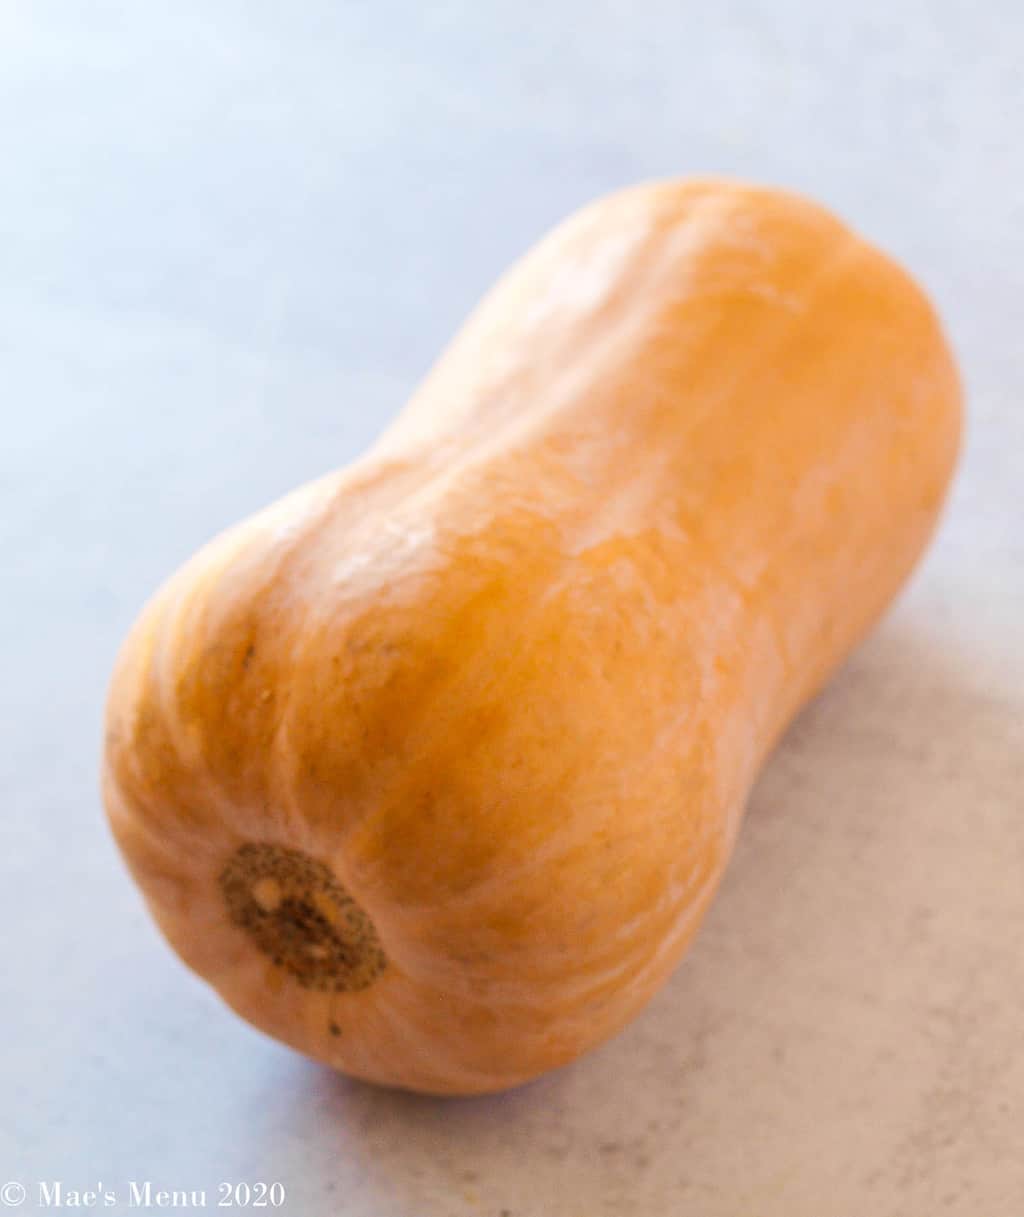 A shot of a butternut squash laying on its side on concrete